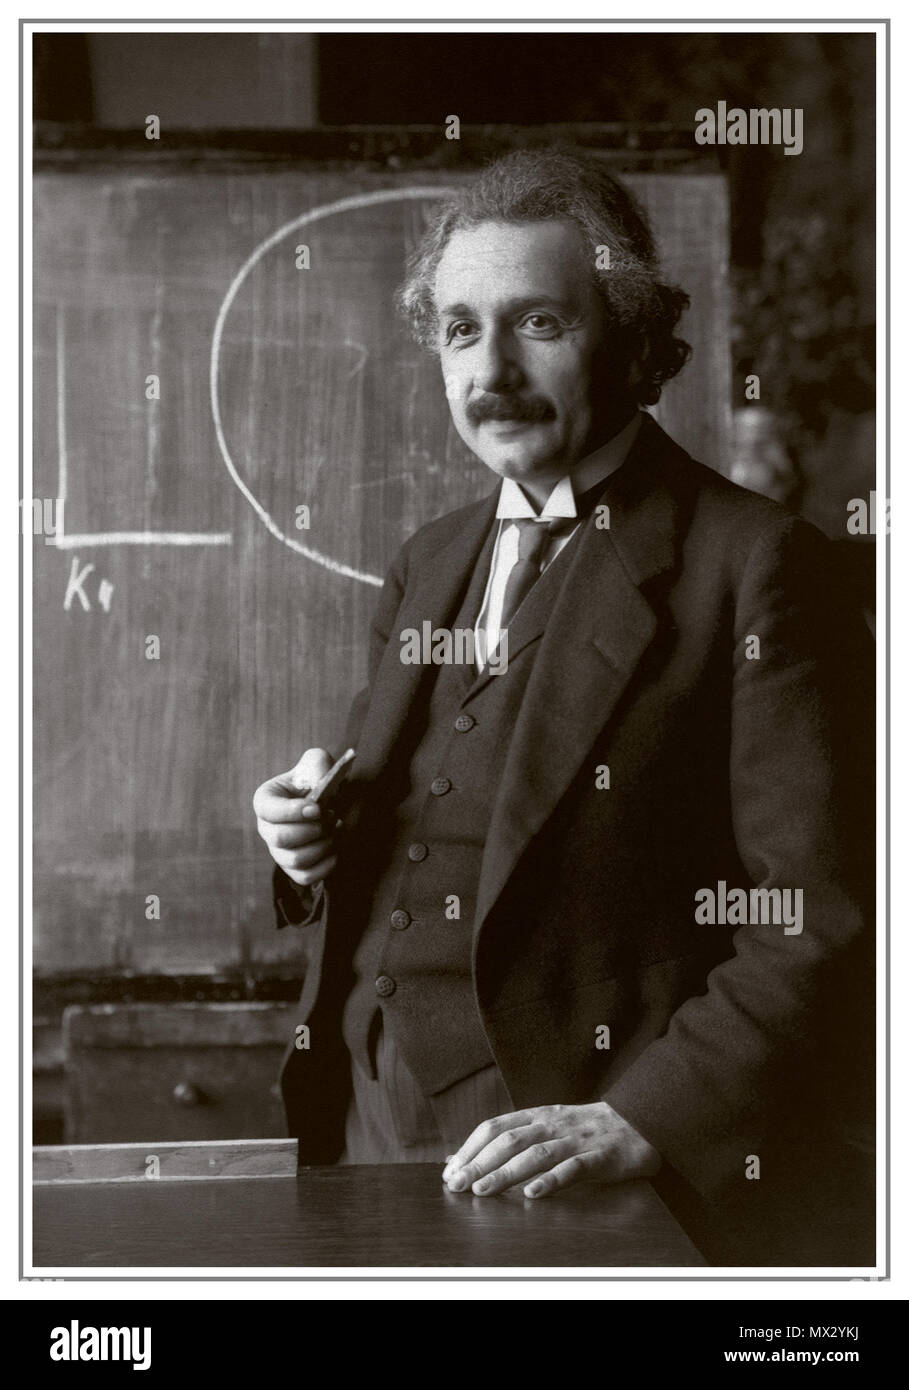 EINSTEIN LECTURE BLACKBOARD Vintage 1920's B&W image of Albert Einstein, winner of Nobel Prize for Physics in 1921 for his services to Theoretical Physics, and especially for his discovery of the law of the photoelectric effect'  shown during a lecture in Vienna in 1920's. Stock Photo